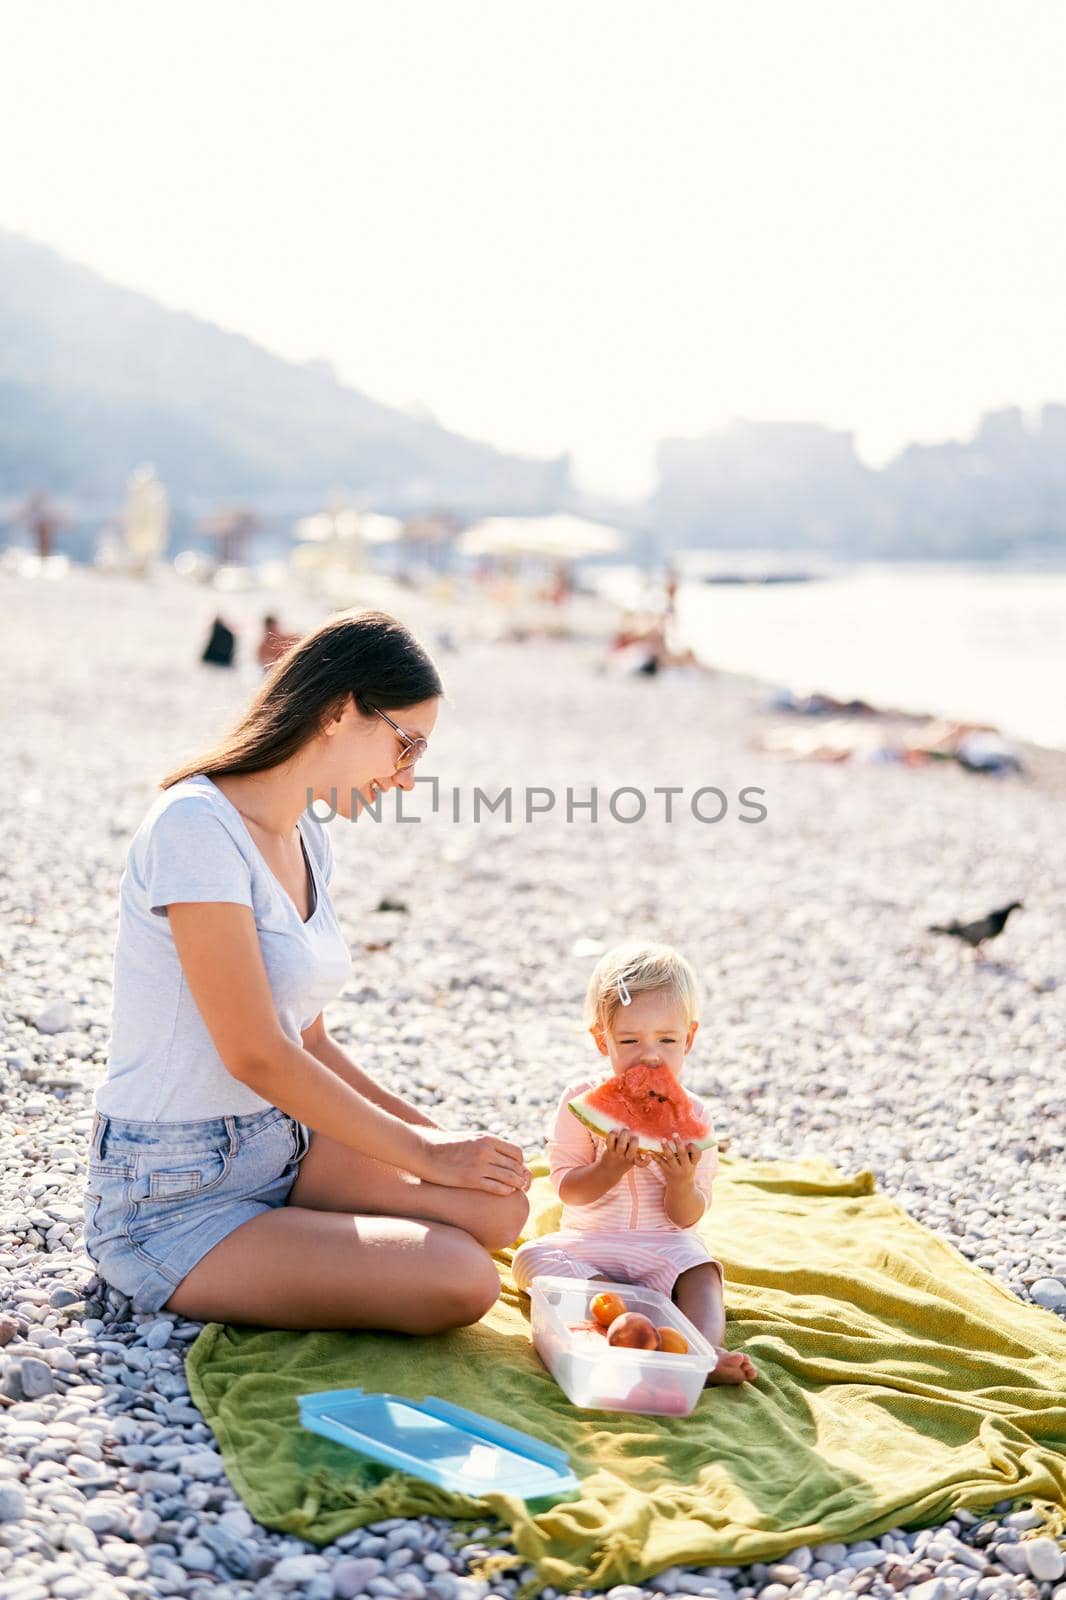 Smiling mom looking at baby girl eating watermelon on the beach by Nadtochiy